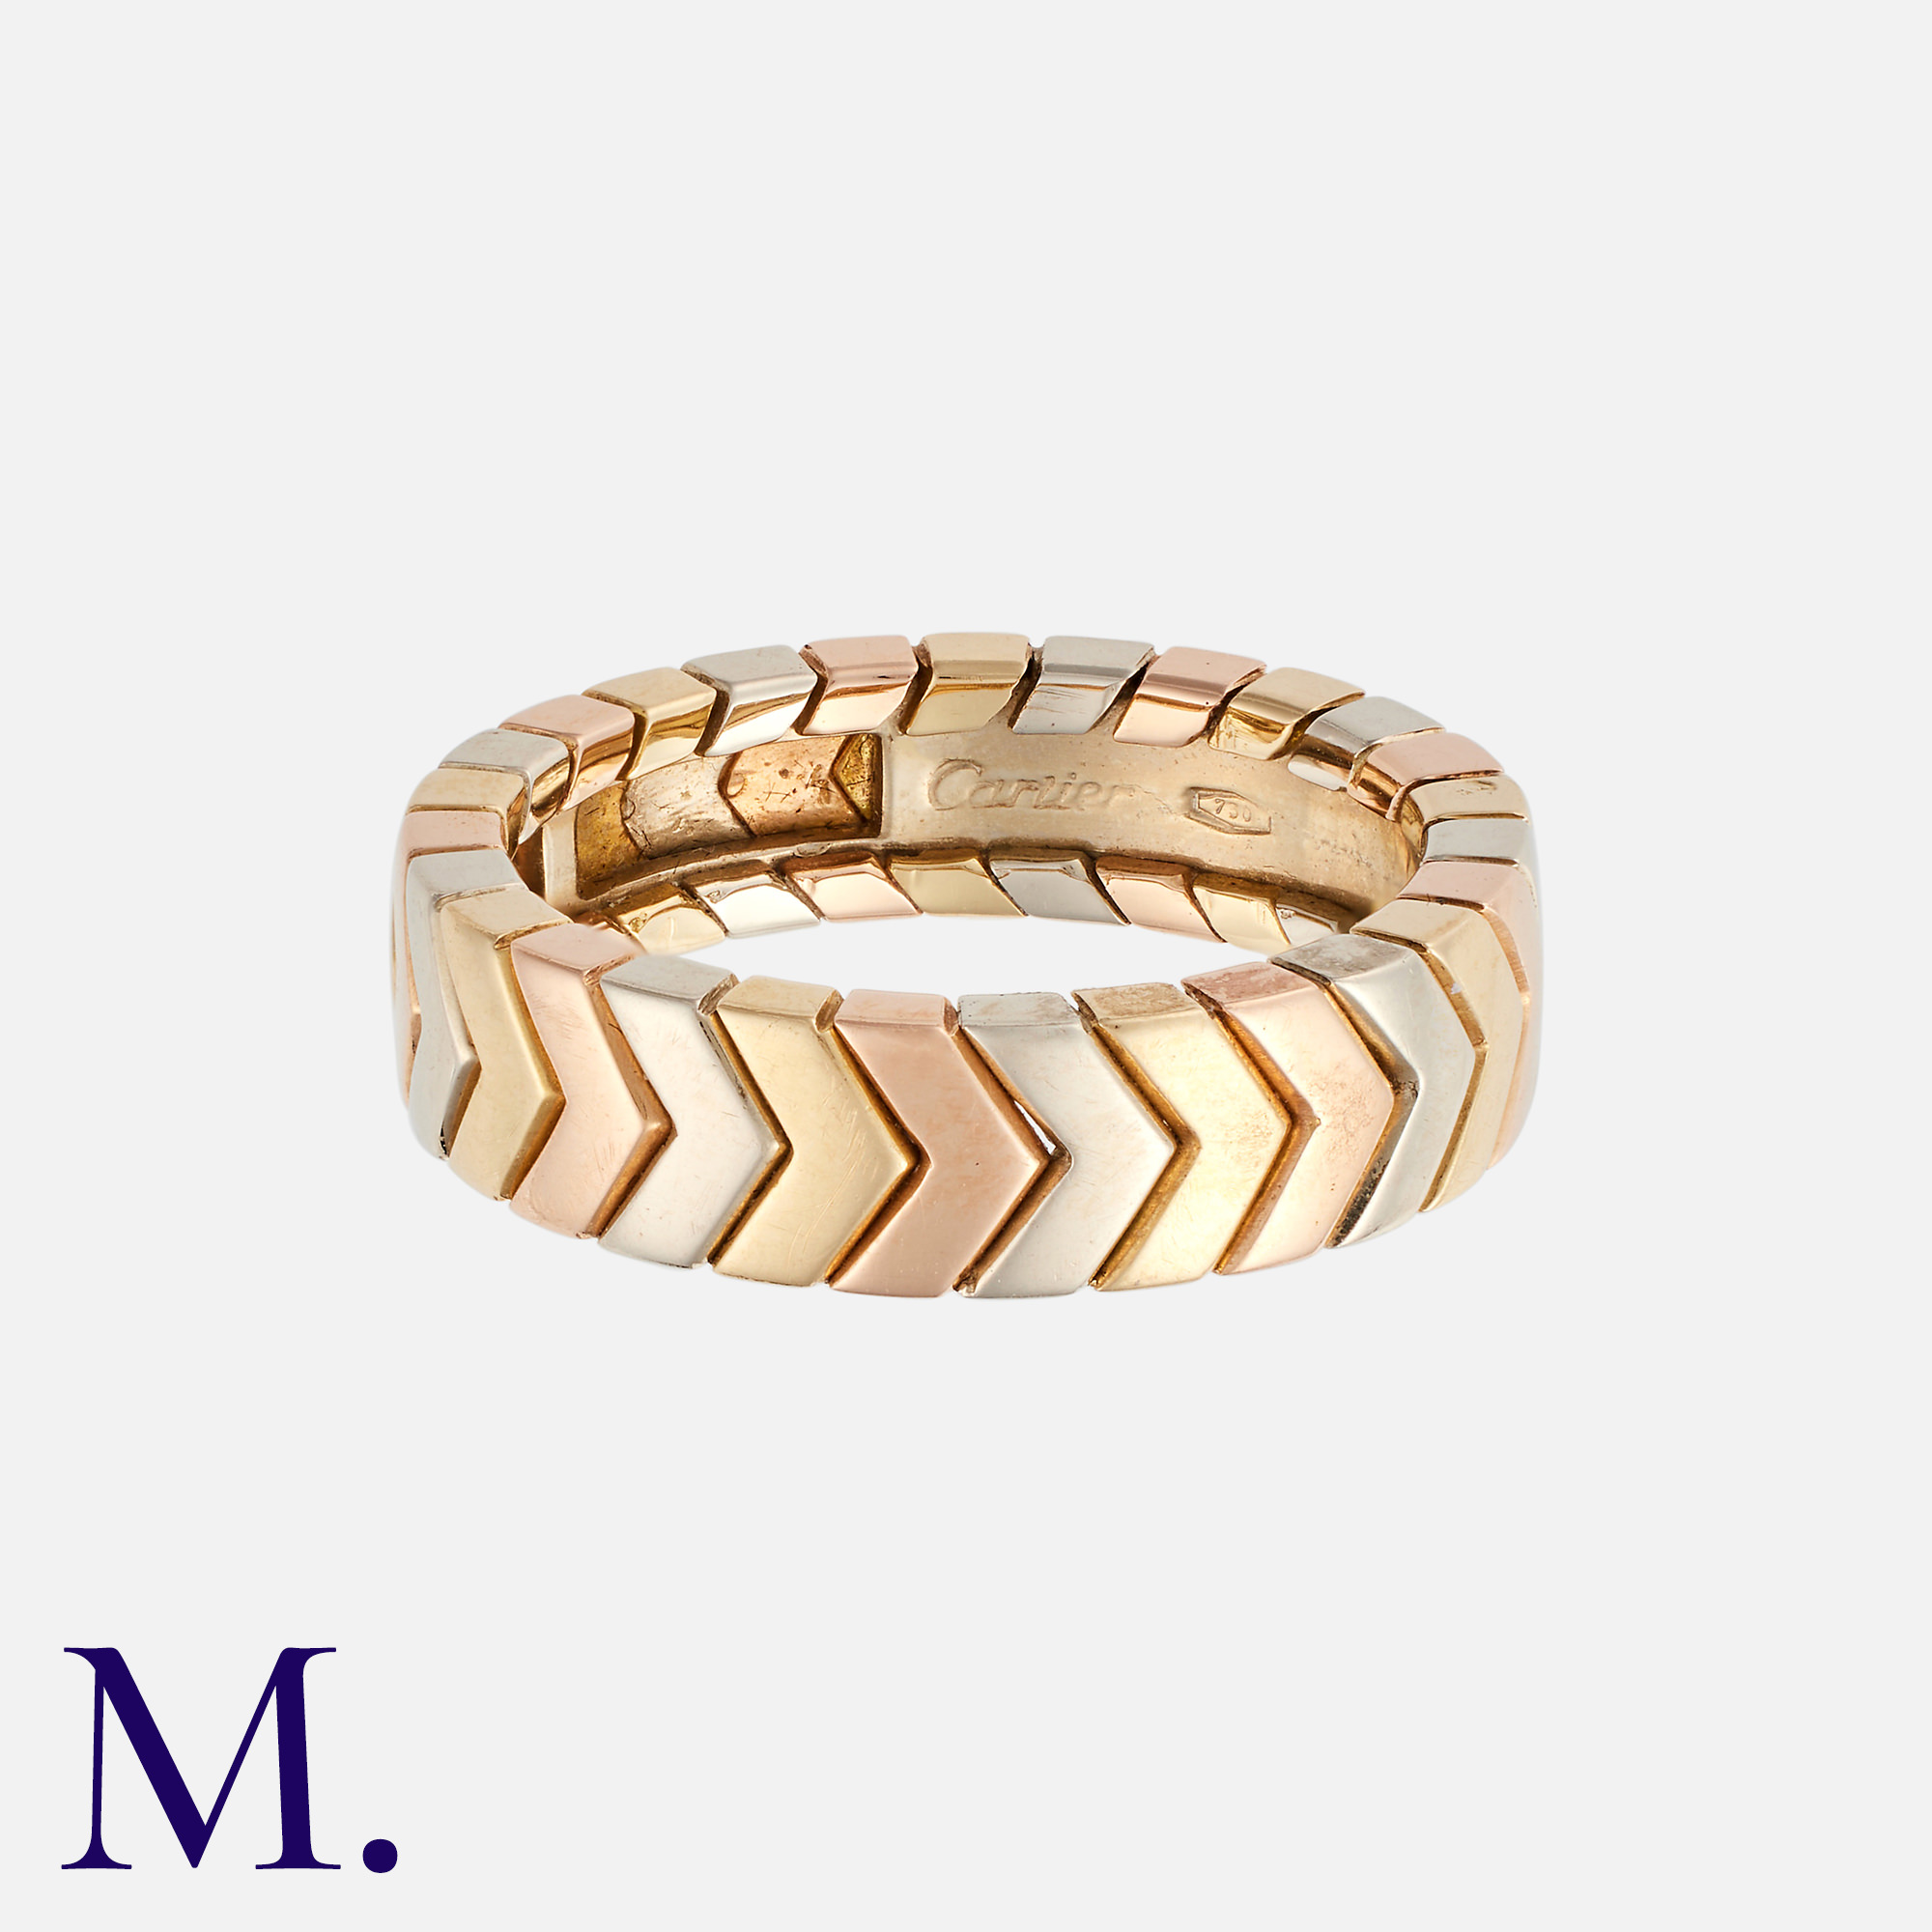 CARTIER. A Chevron Ring in 18K rose, white and yellow gold, in chevron form. Signed Cartier and - Image 2 of 2